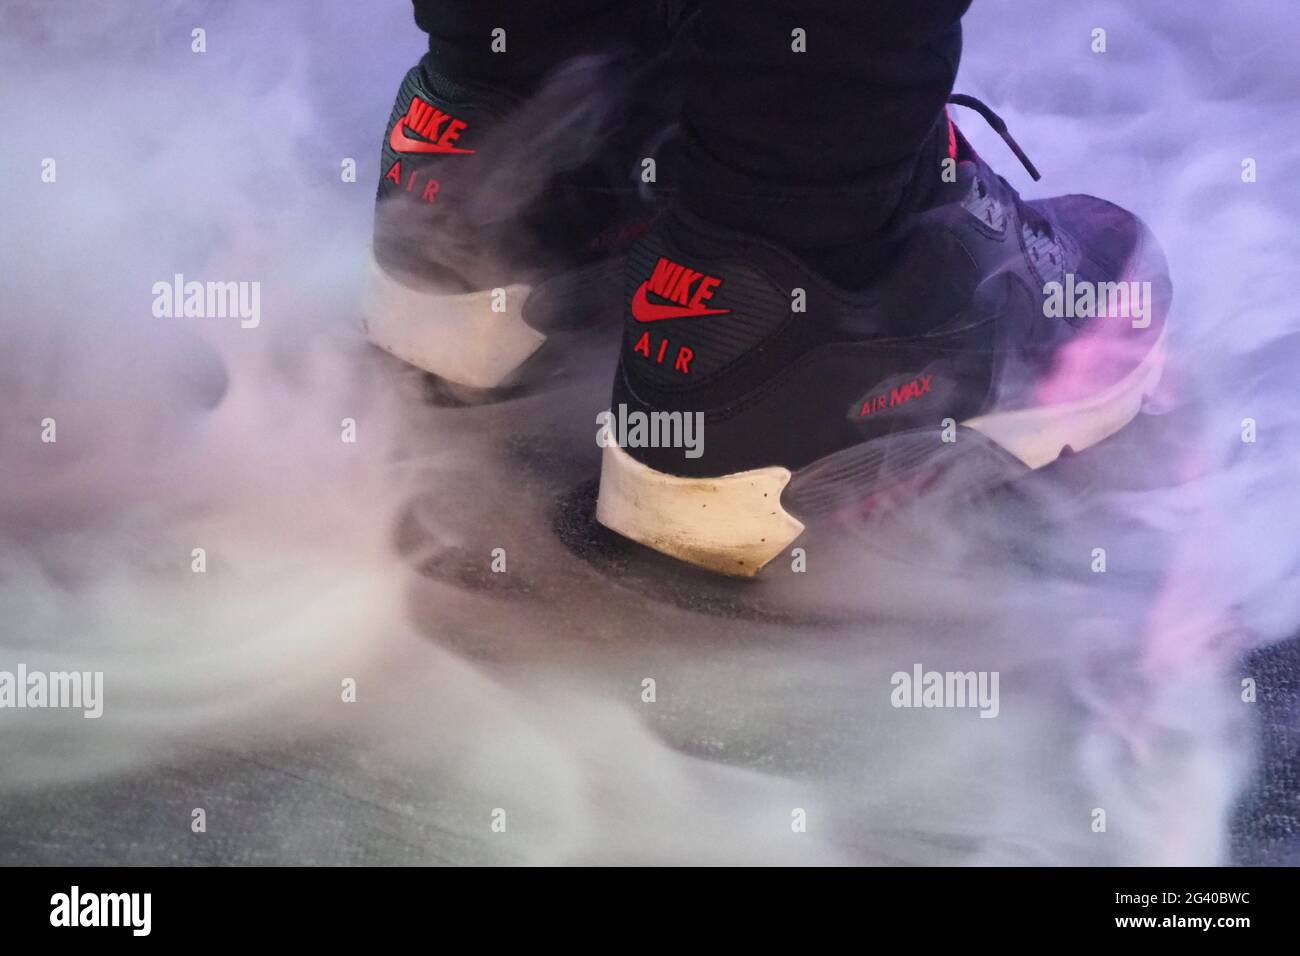 BPM 2019 - The Show For DJs, Nike Air Max Trainers surrounded by swirling dry ice Stock Photo